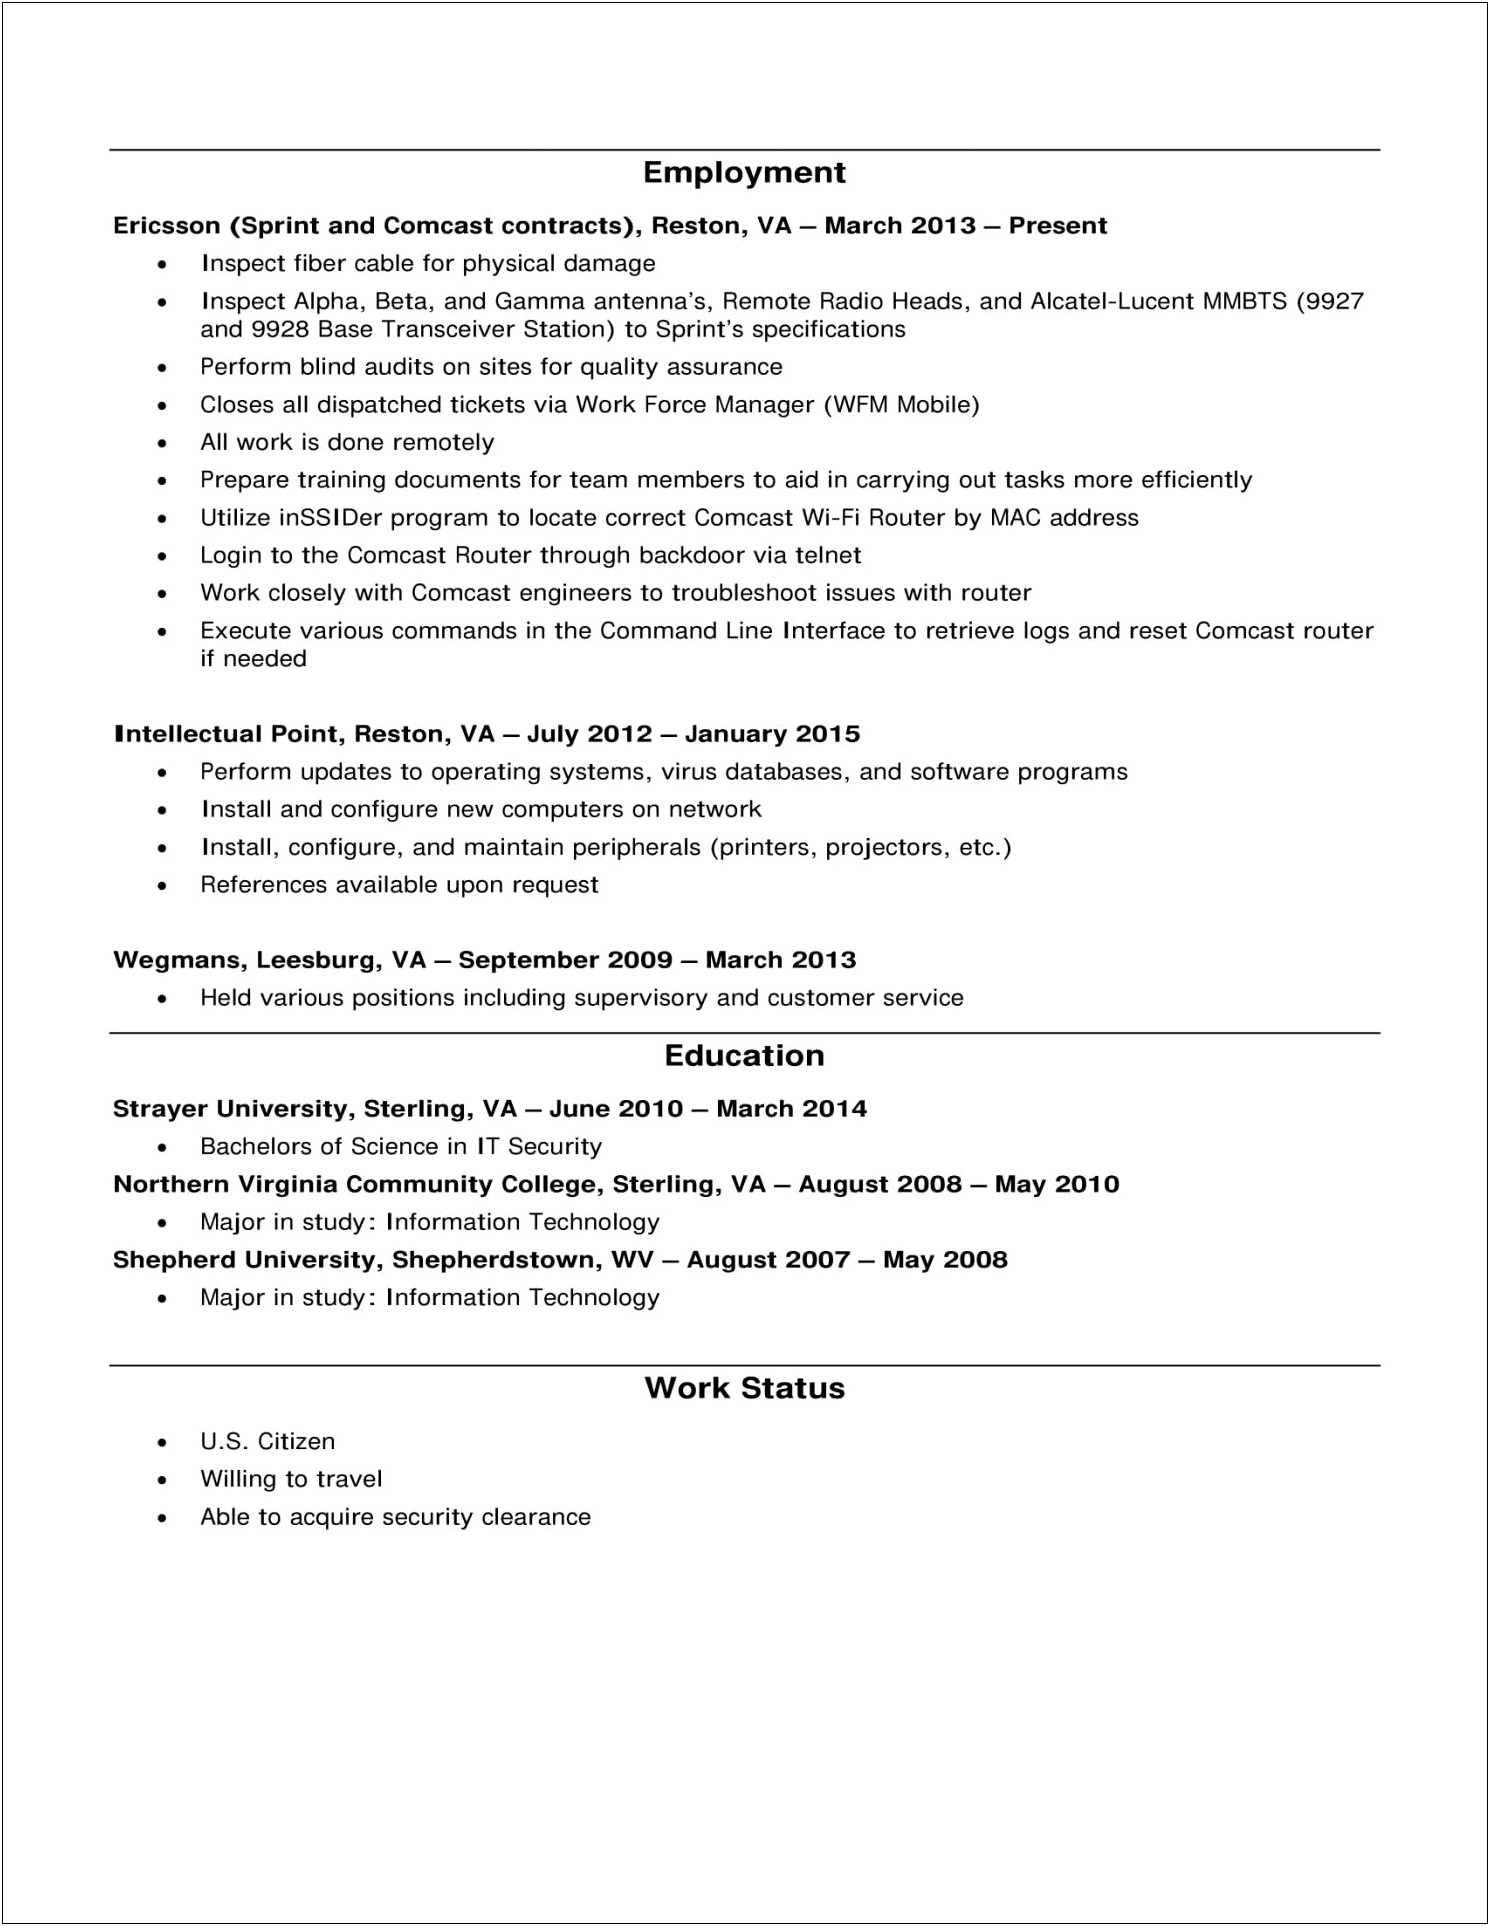 Examples Of Security Clearance On Resume